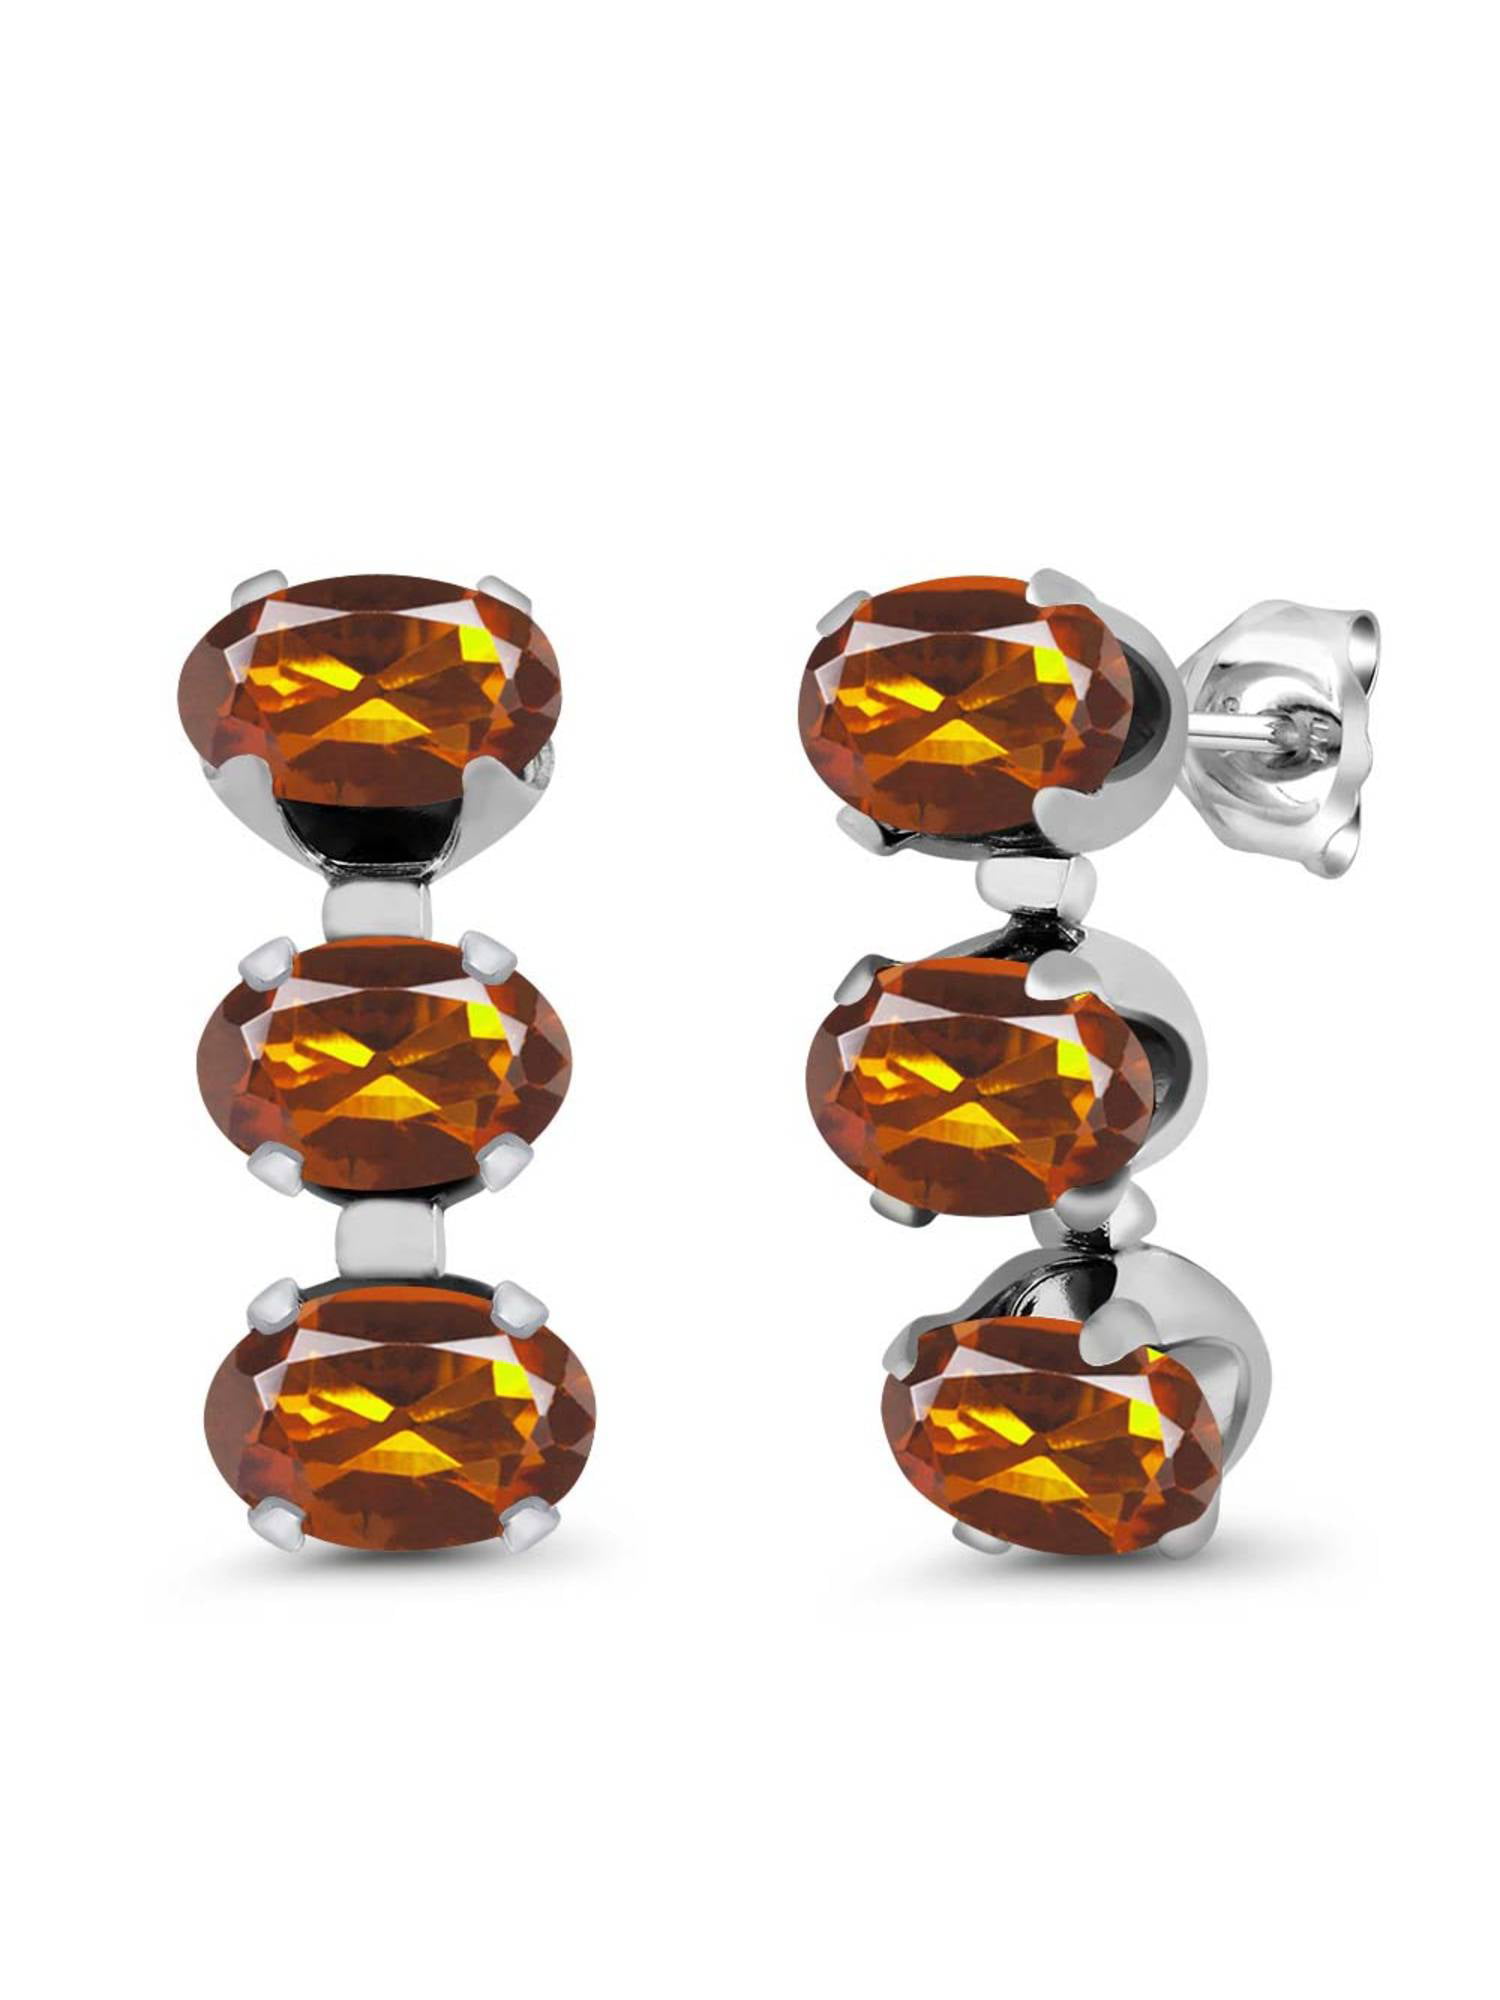 2.40 Ct Oval Orange Red Madeira Citrine 925 Sterling Silver 3-Stone Earrings